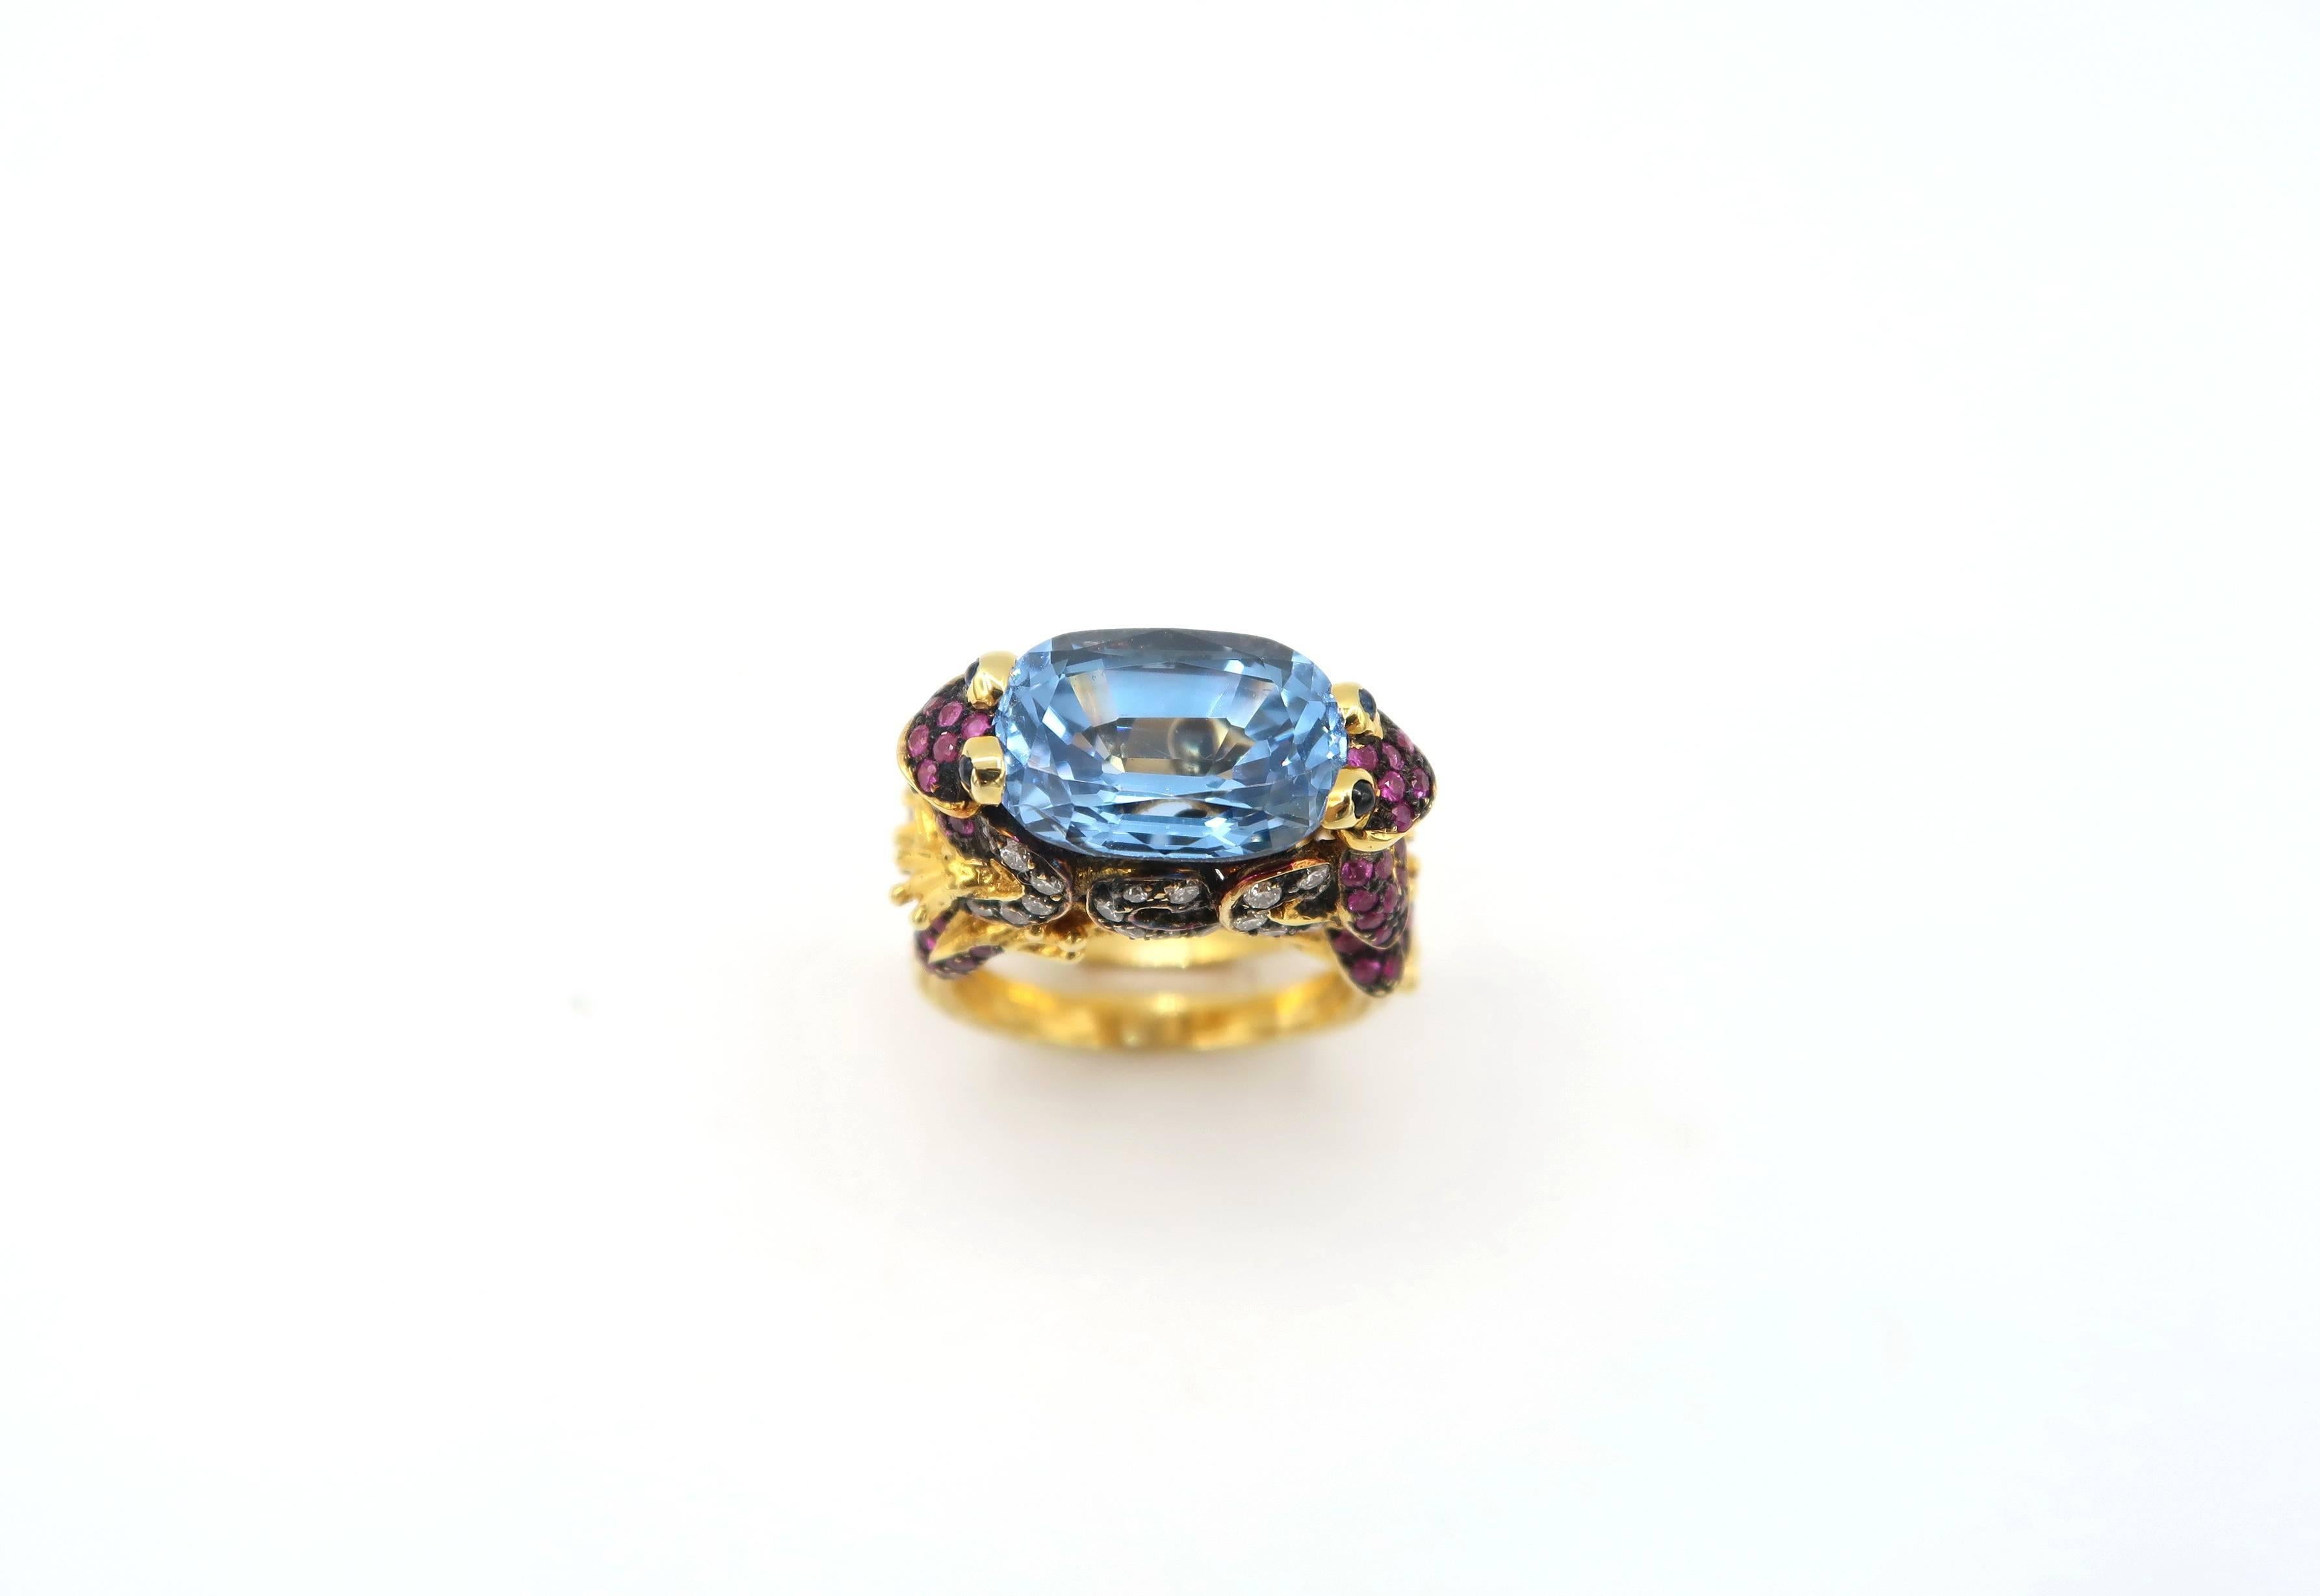 Cushion Cut Frog Prince 7.17 Carat Blue Topaz Pink Blue Sapphire Champagne Diamond Gold Ring For Sale